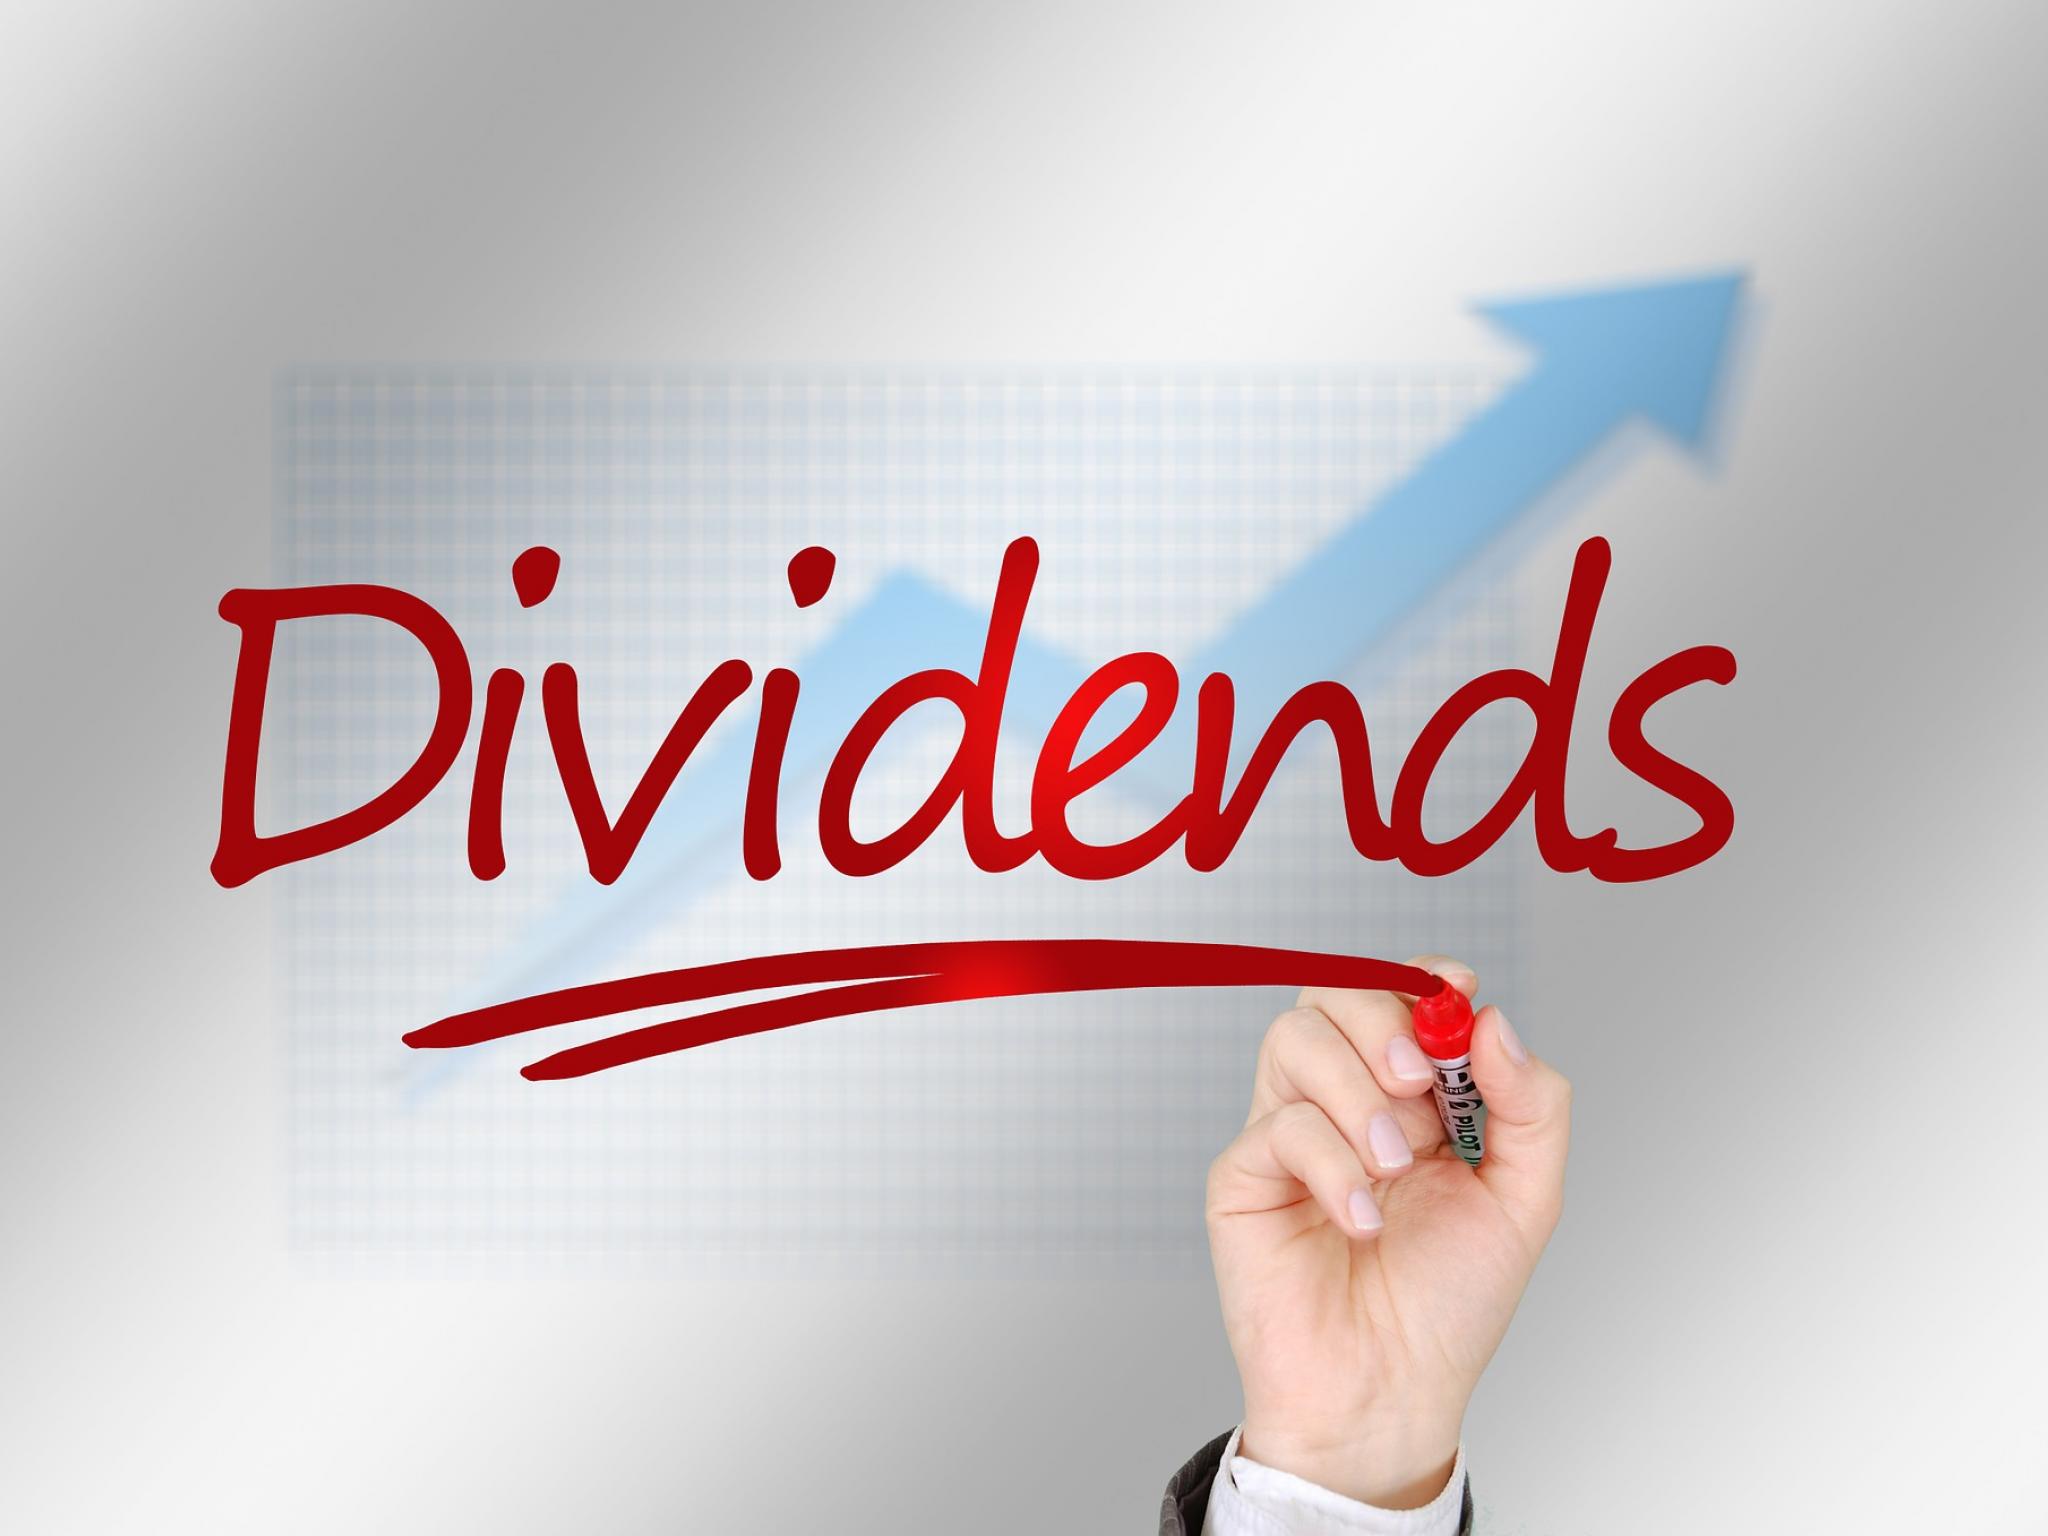  15-best-dividend-stocks-across-these-3-key-sectors 